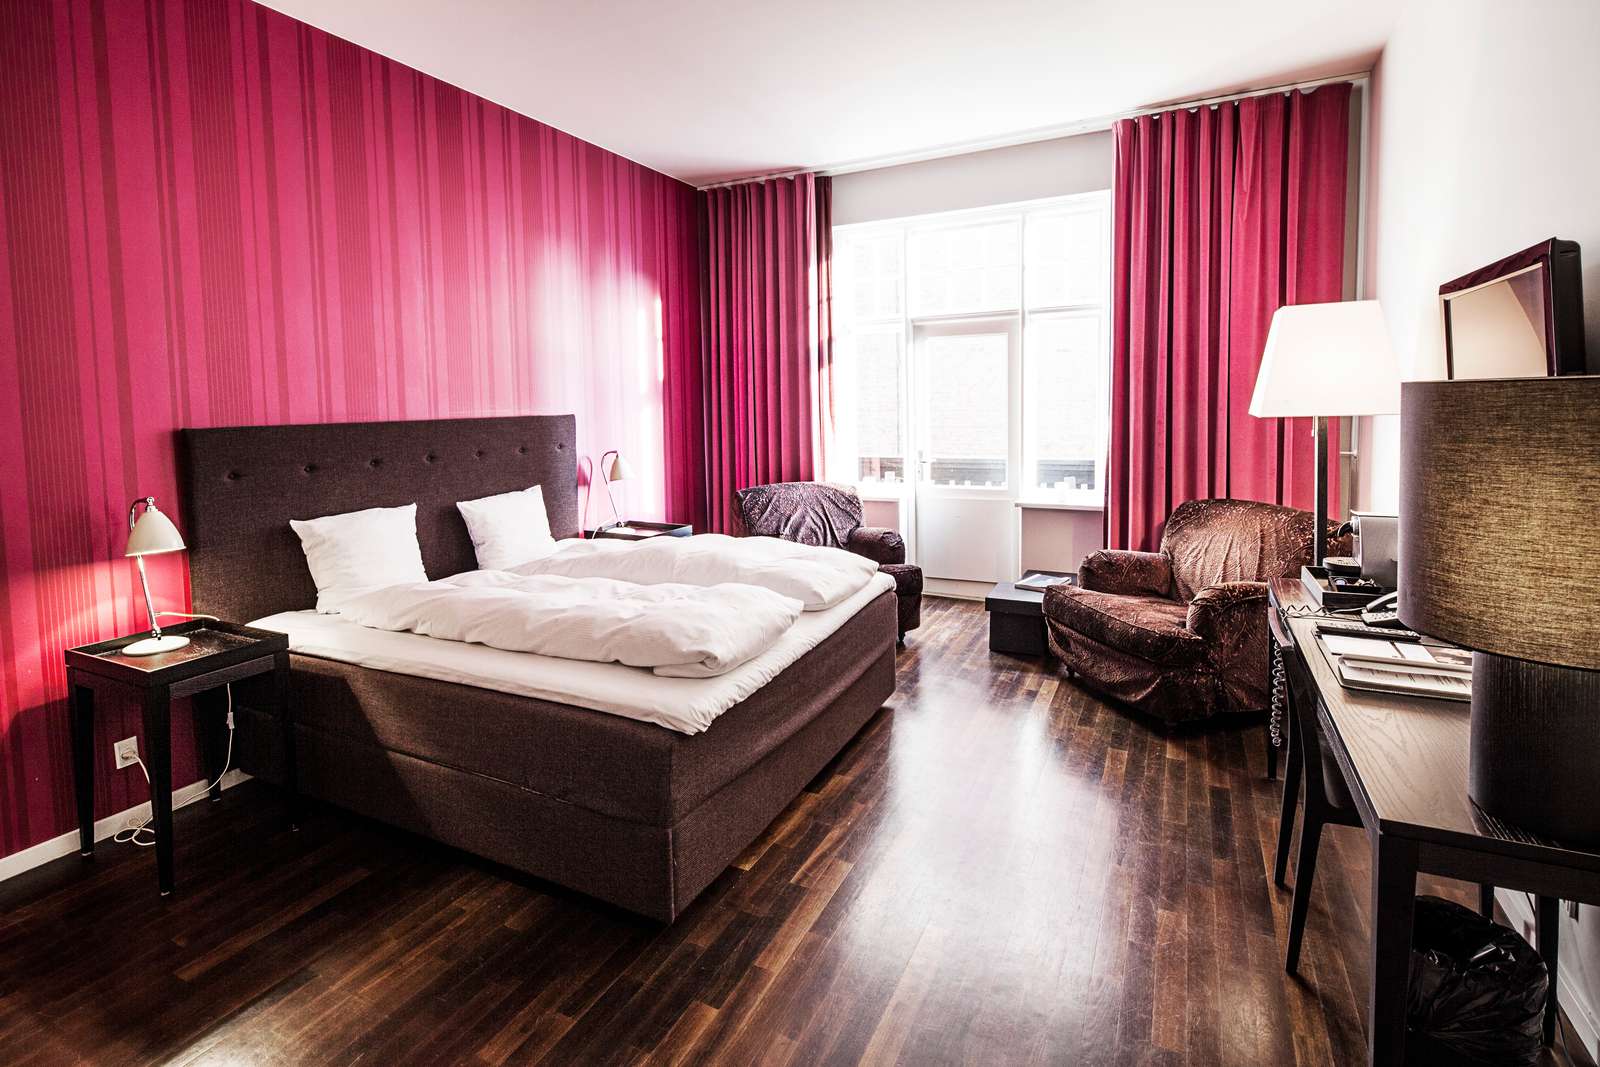 Hotel - First Hotel Grand Odense, Executive king